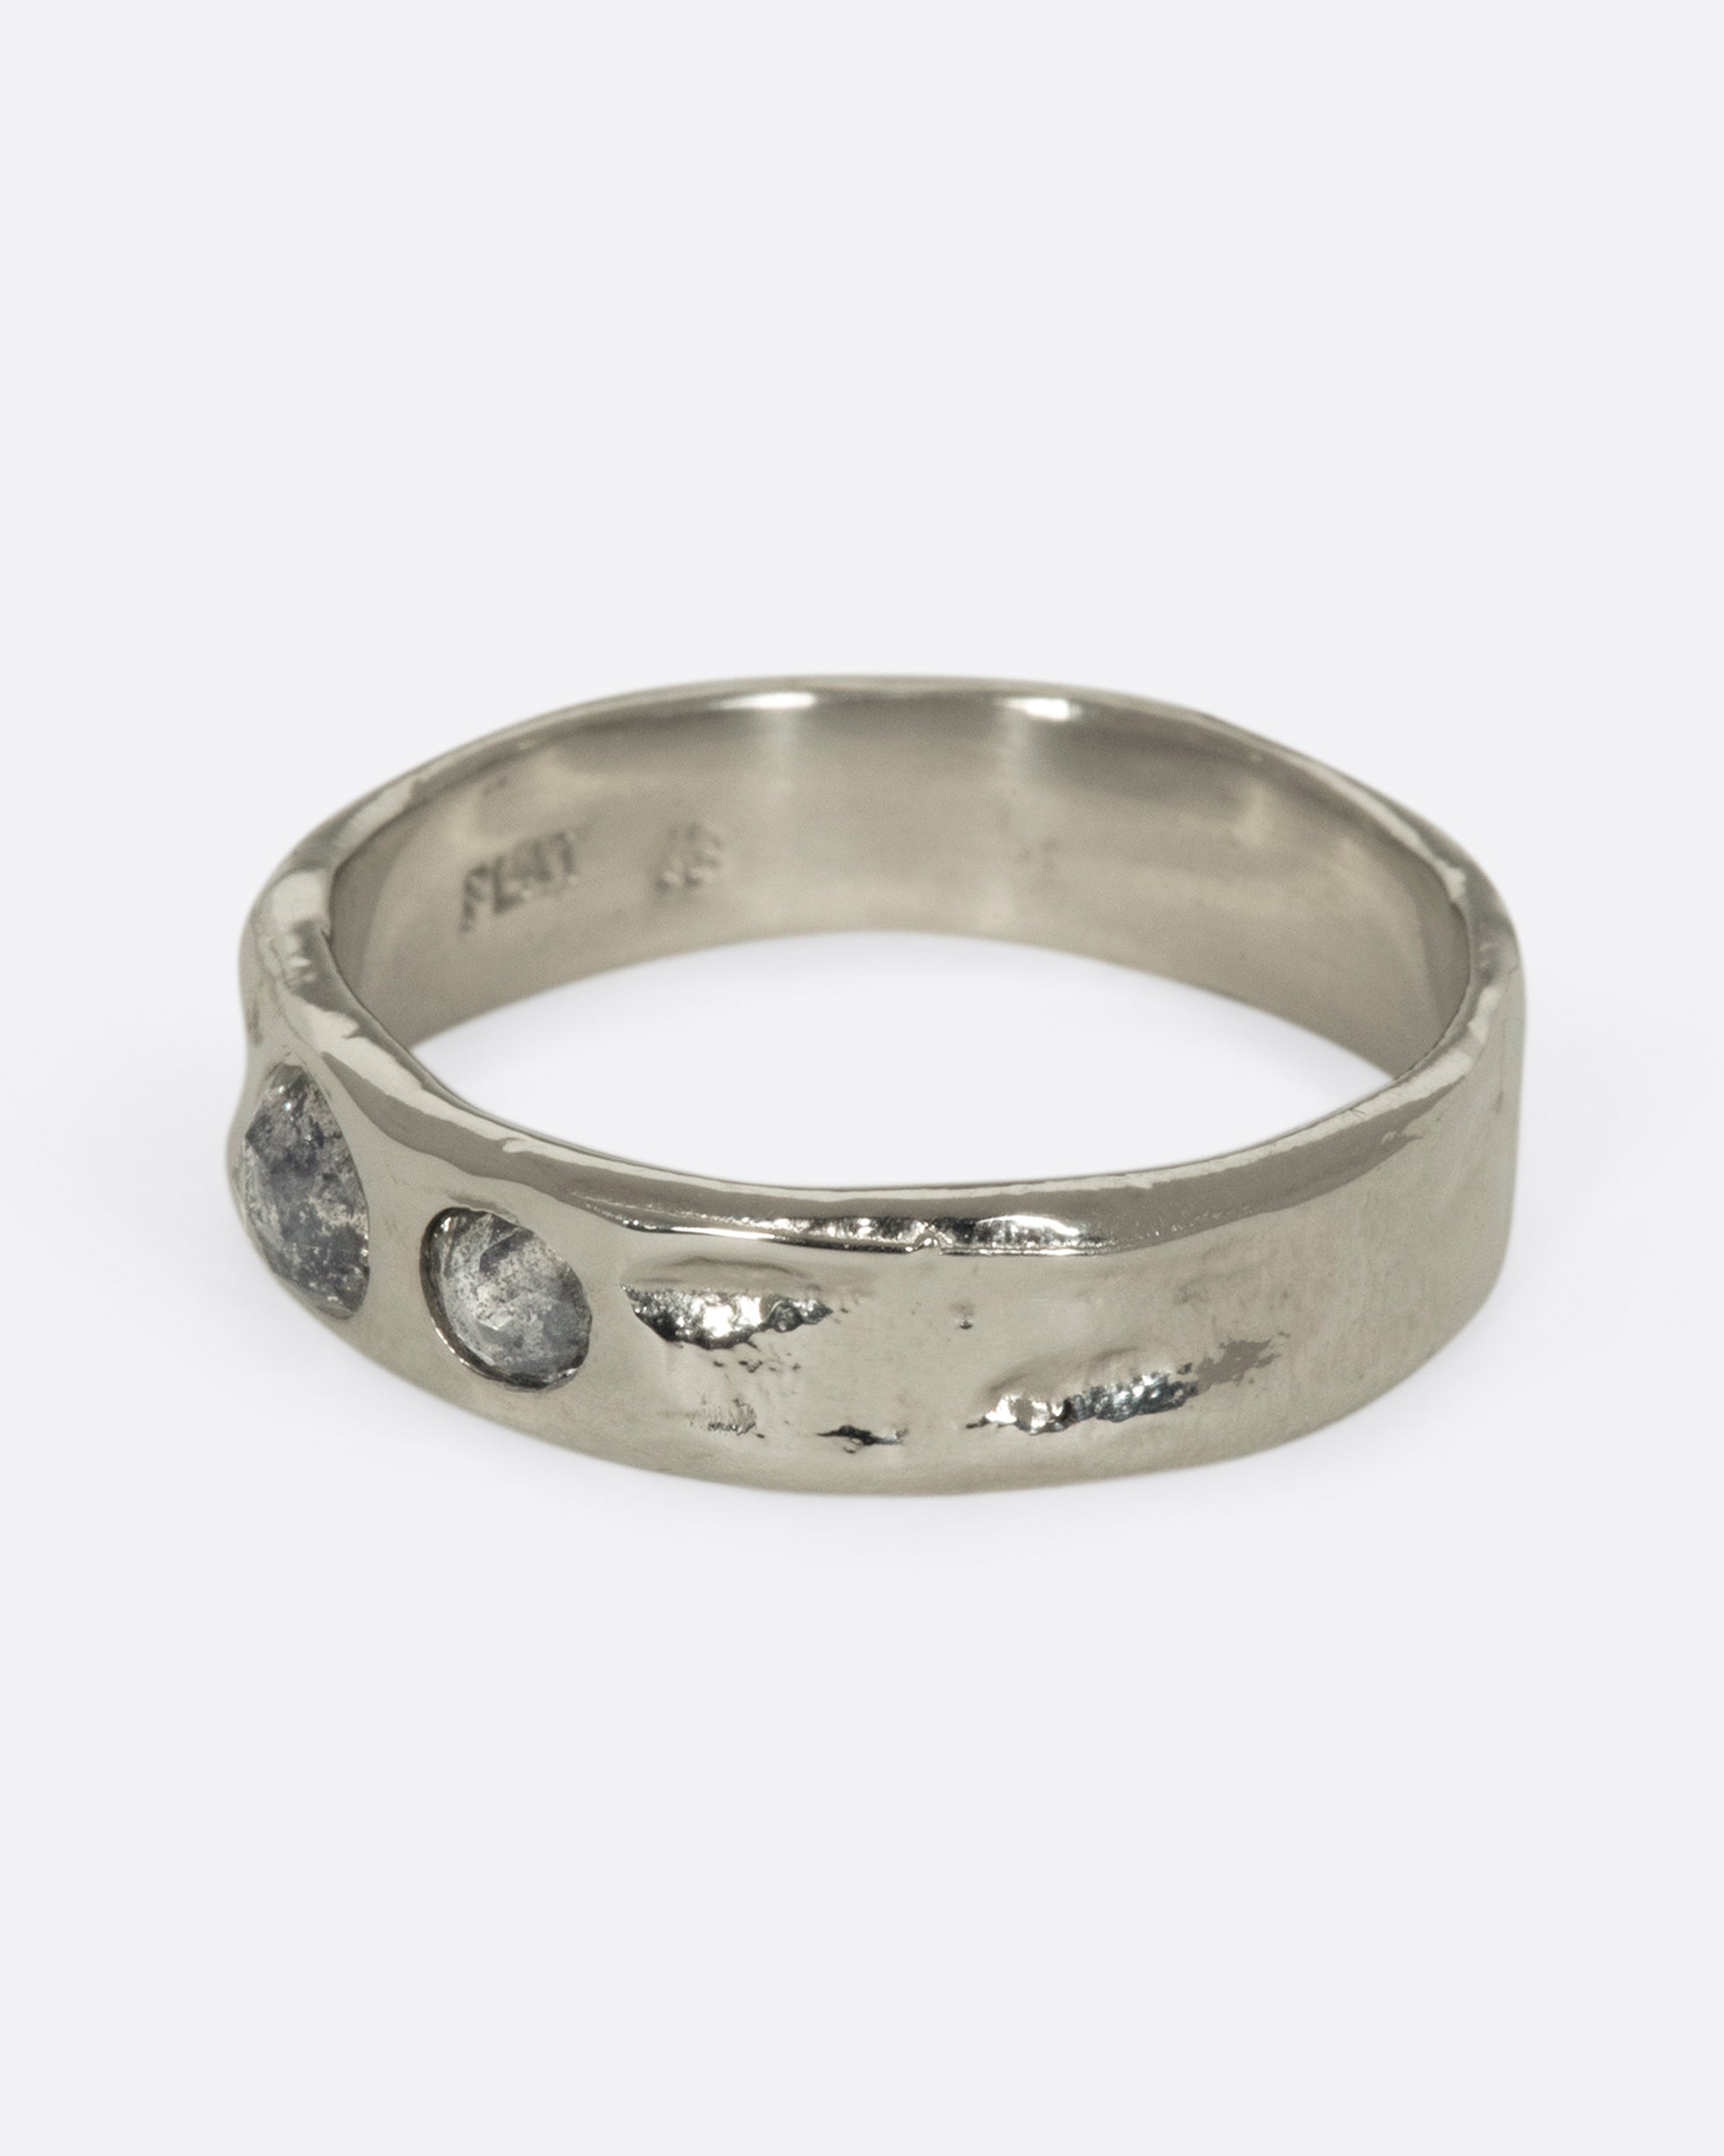 Medium wide band with light texture, featuring two rose cut salt & pepper diamonds flush to the band. 